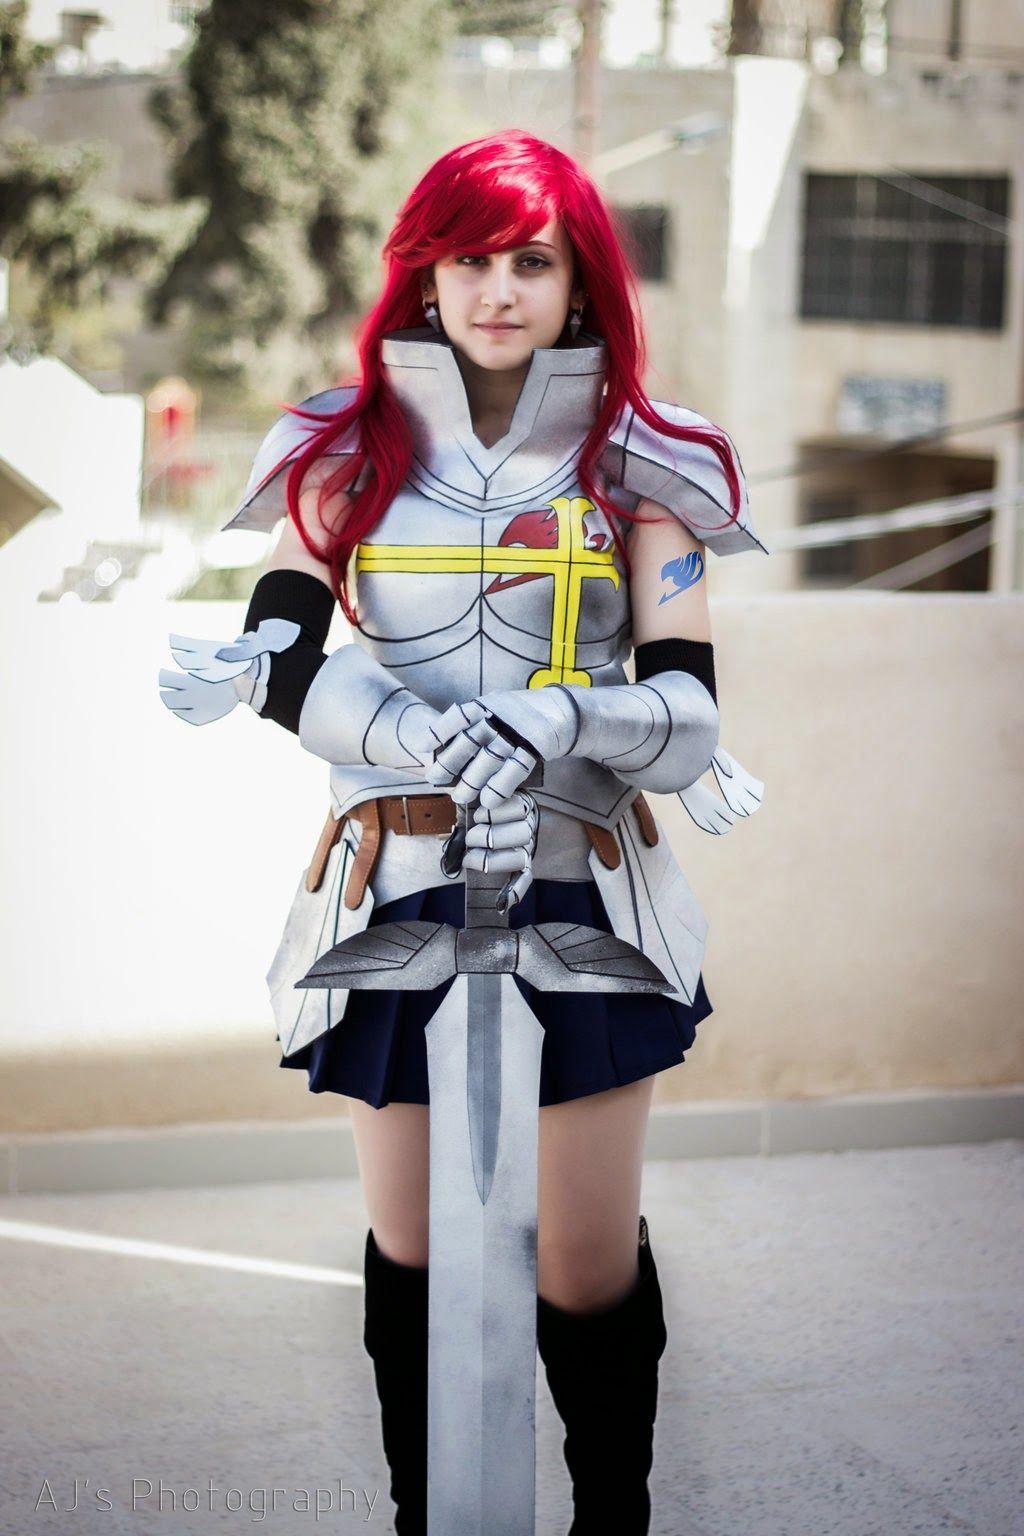 70+ Hot Pictures Of Erza Scarlet from Fairy Tale Which Will Leave You Dumbstruck 7